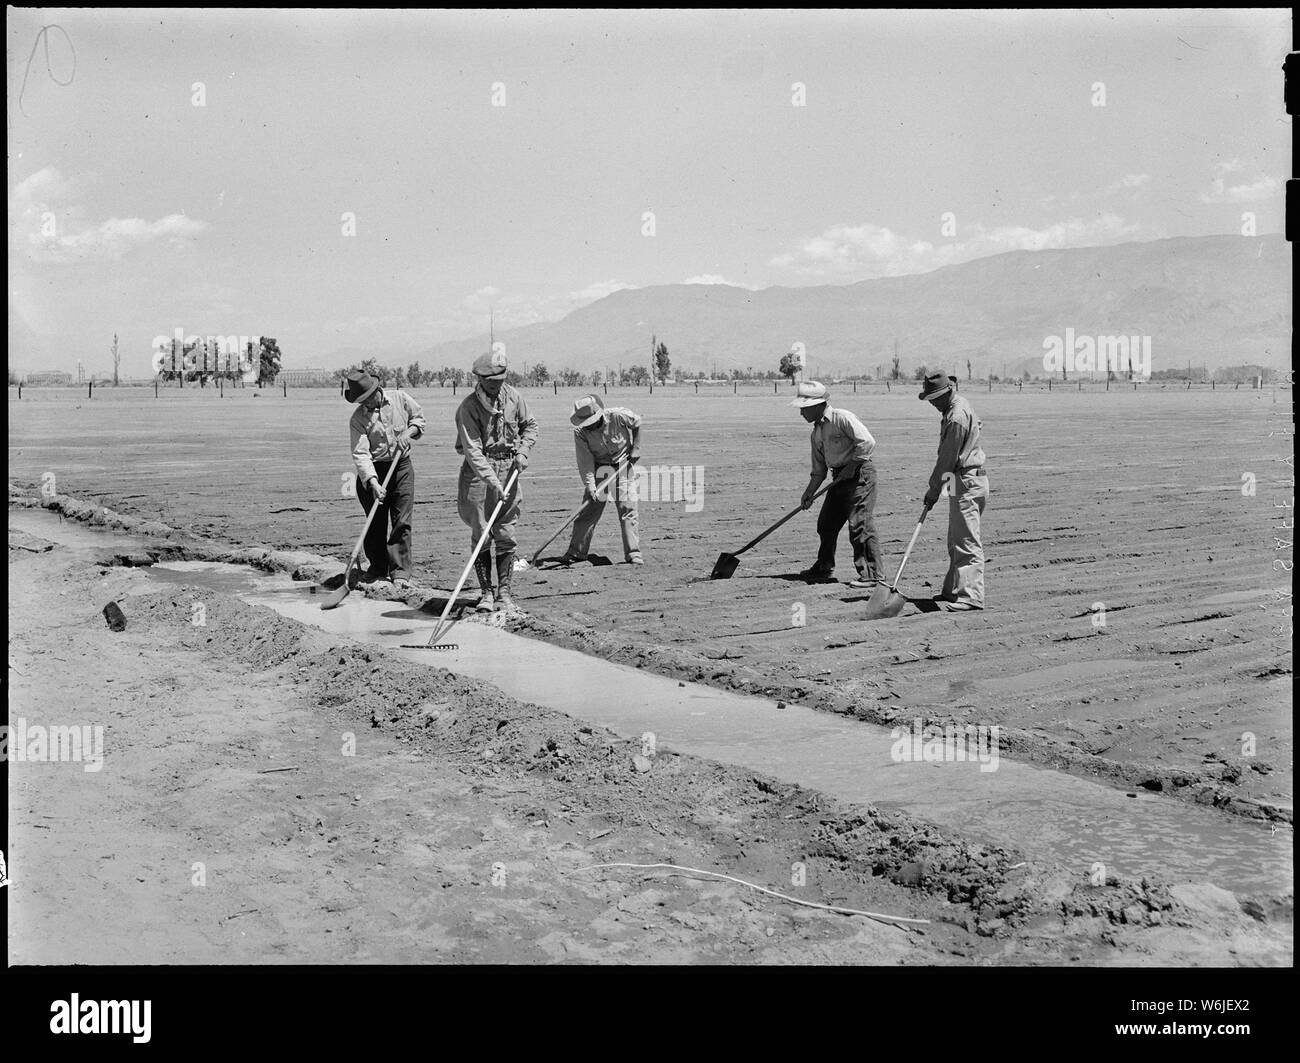 Manzanar Relocation Center, Manzanar, California. Irrigation recently planted onion field at the re . . .; Scope and content:  The full caption for this photograph reads: Manzanar Relocation Center, Manzanar, California. Irrigation recently planted onion field at the relocation center. Stock Photo